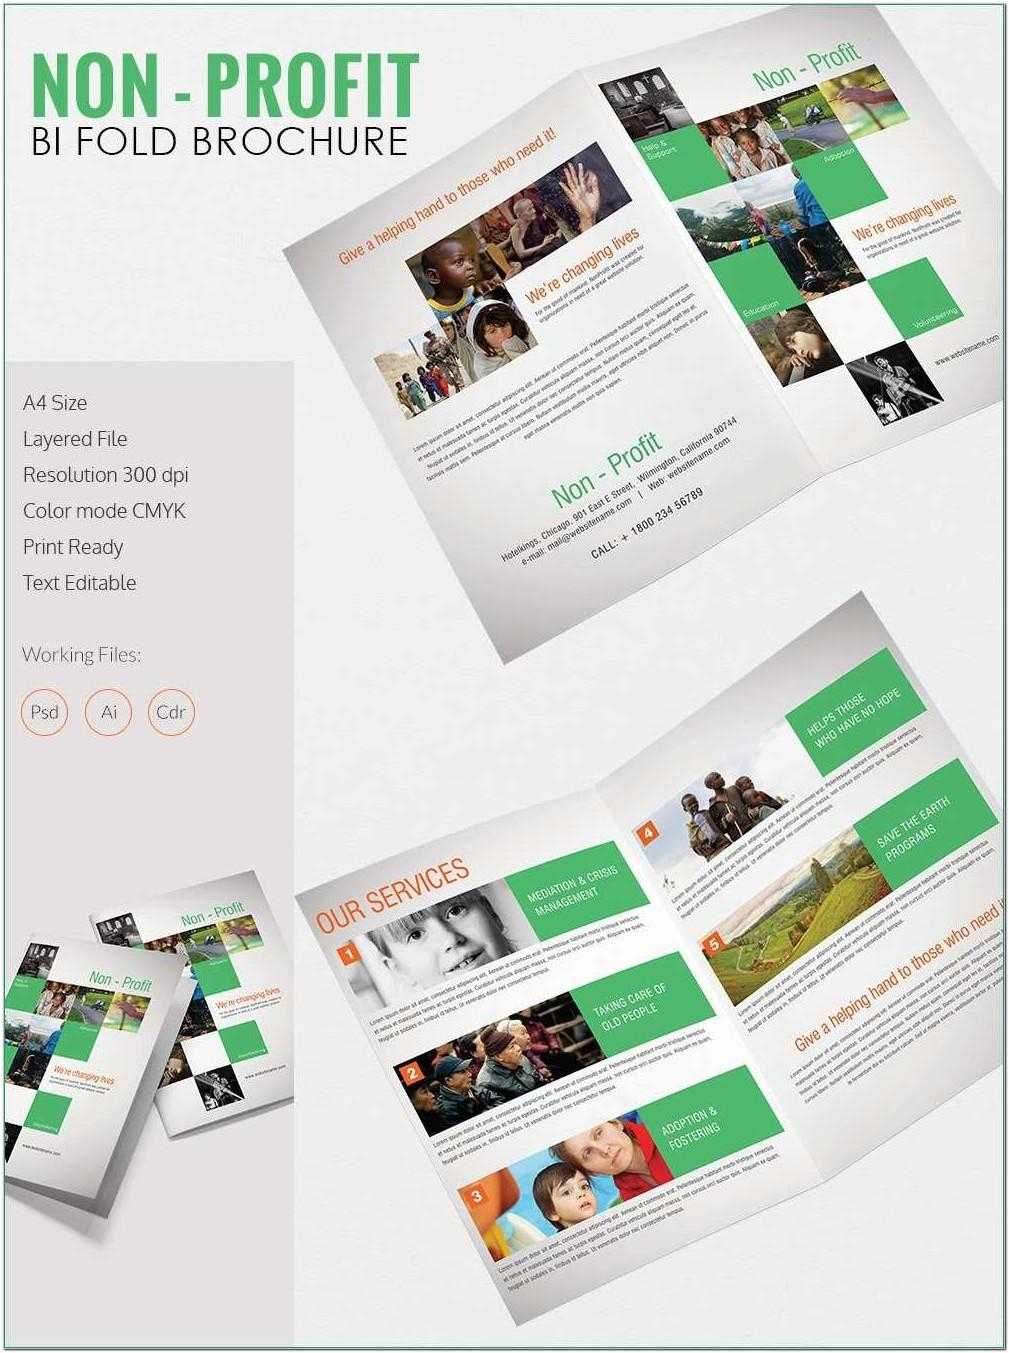 2 Fold Brochure Template Free Download Publisher - Template With 2 Fold Brochure Template Free